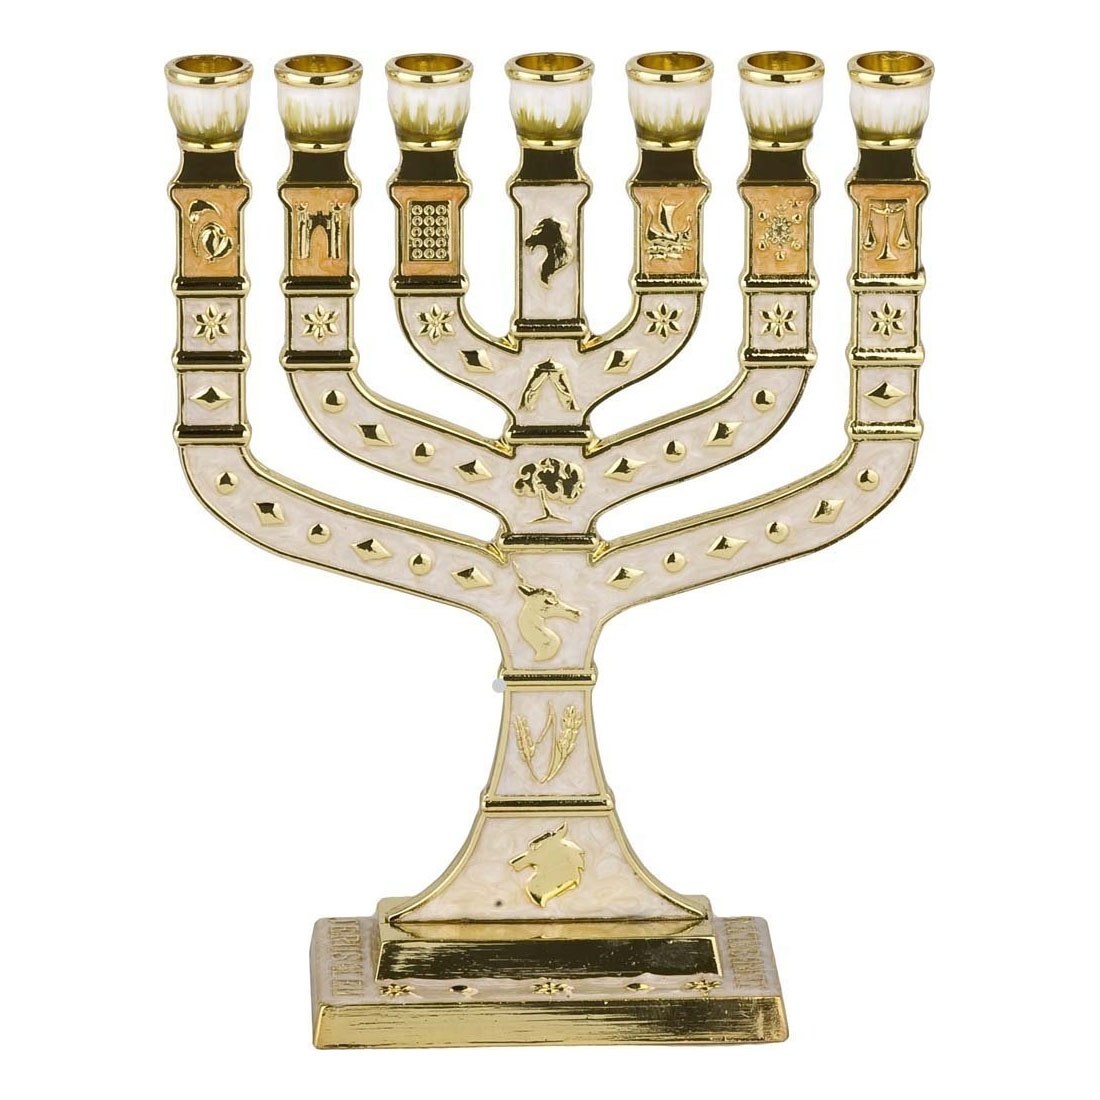 Beige Knesset with Jerusalem and 12 Tribes 7-Branched Enamel Menorah - 1